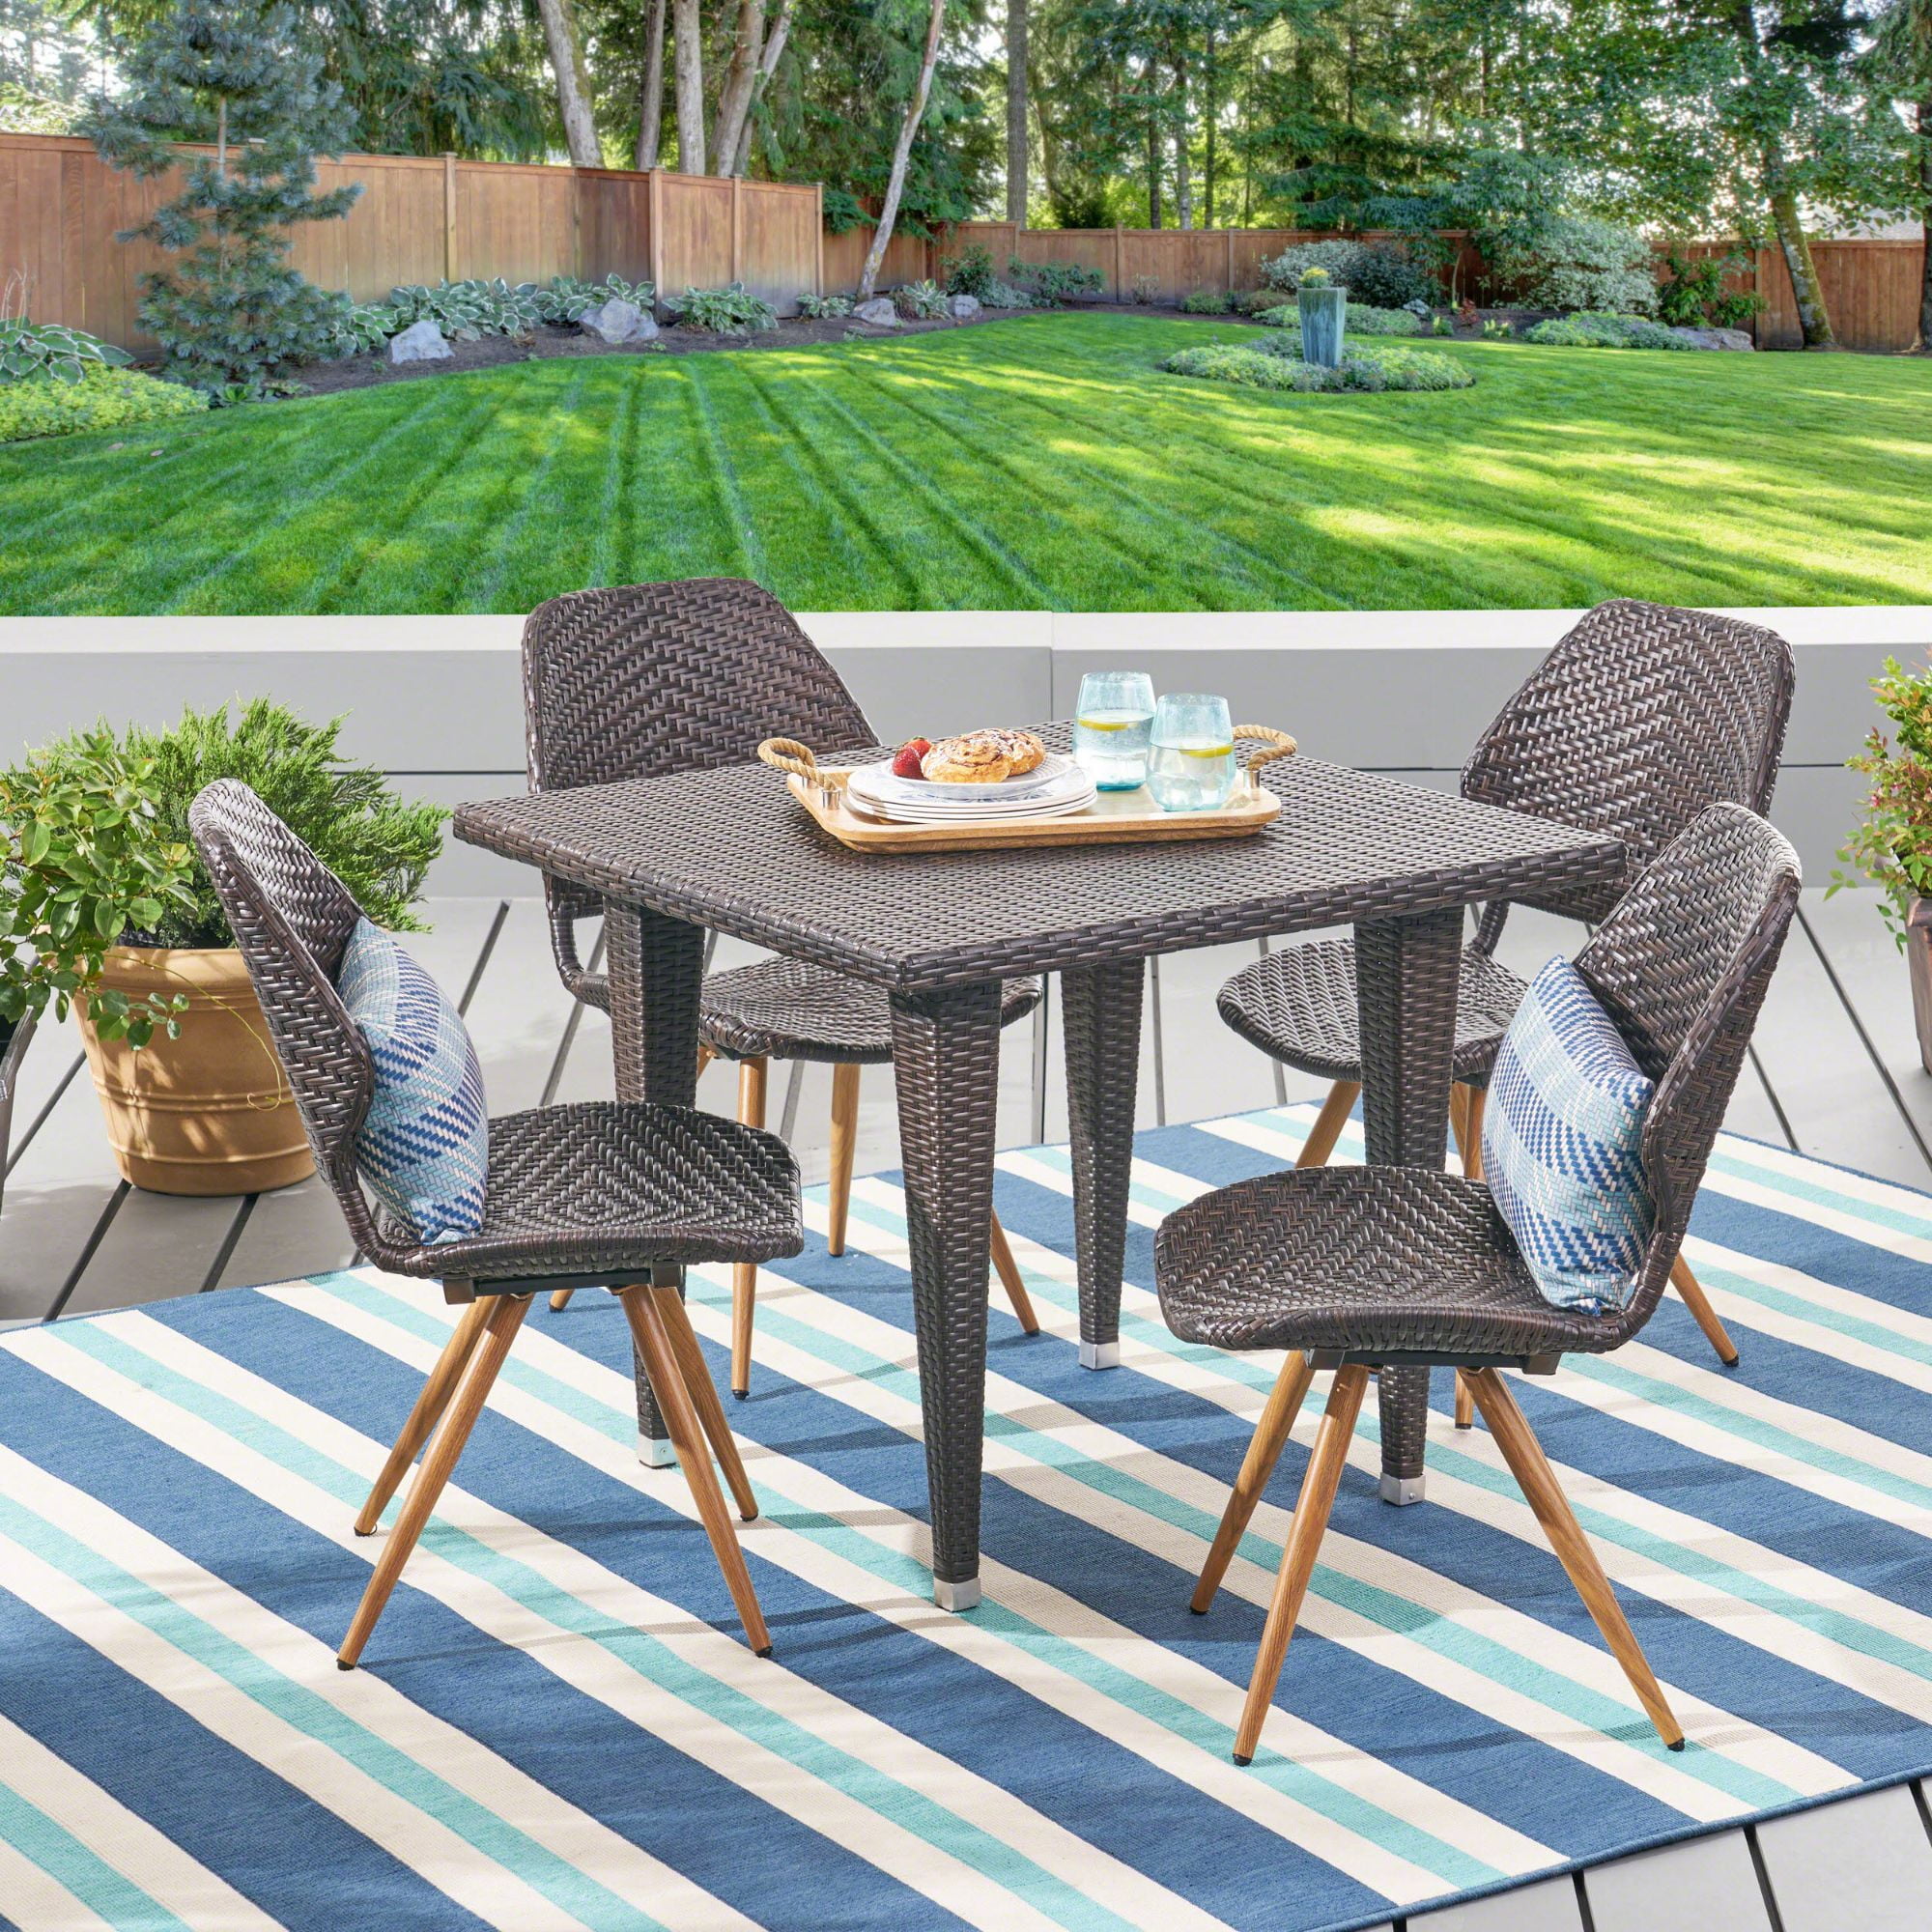 5-Piece Brown Finish Square Wicker Outdoor Furniture Patio Dining Set